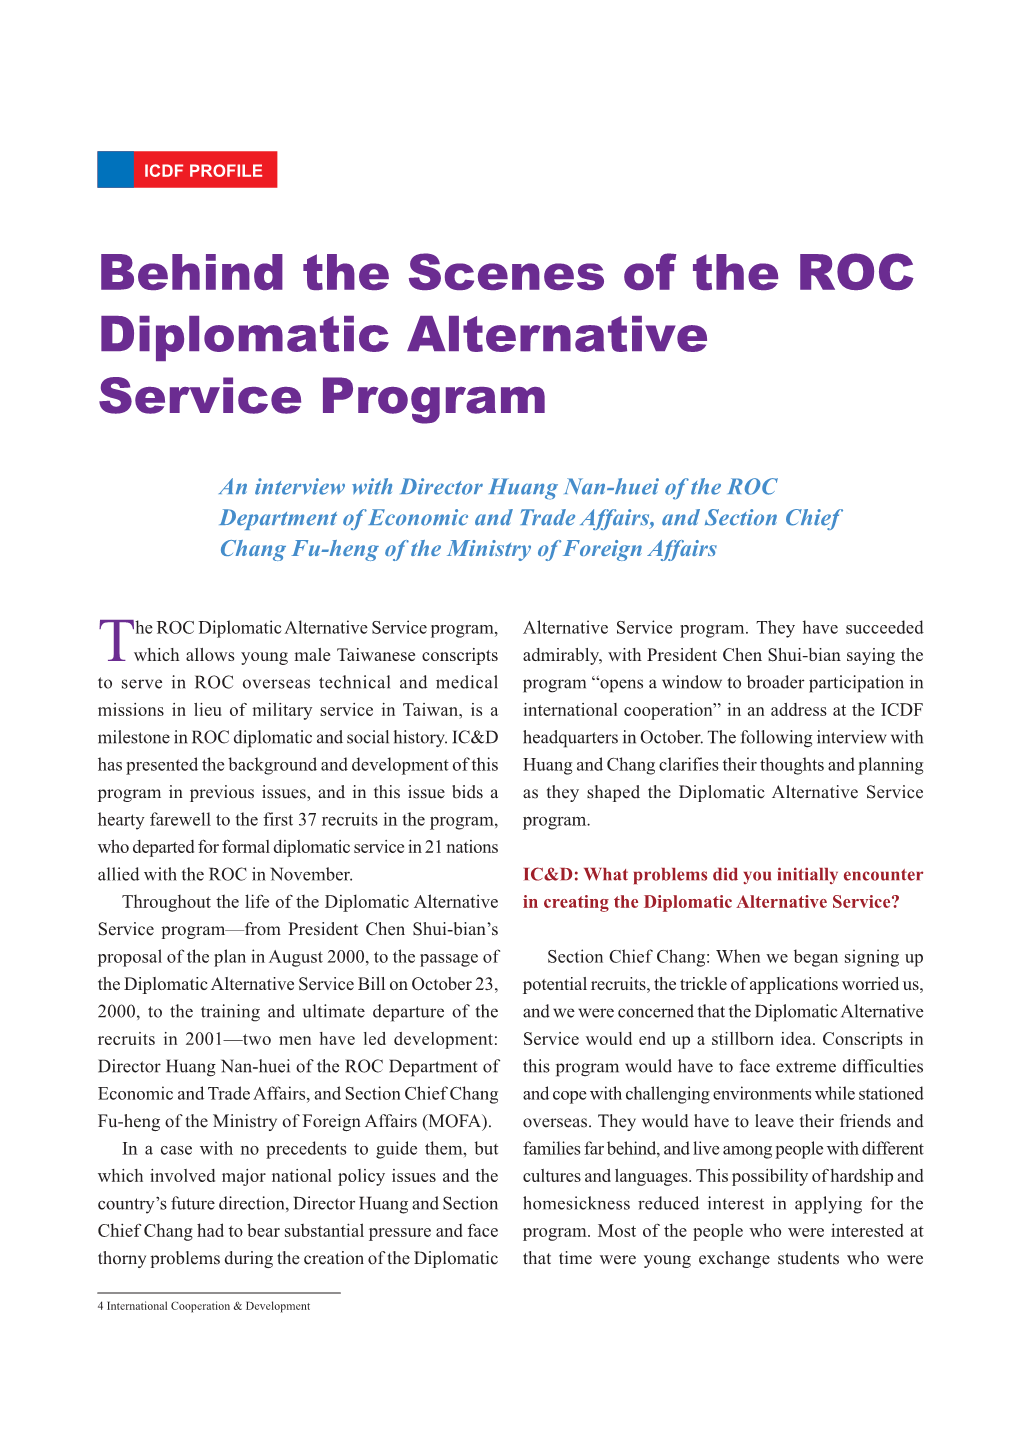 Behind the Scenes of the ROC Diplomatic Alternative Service Program